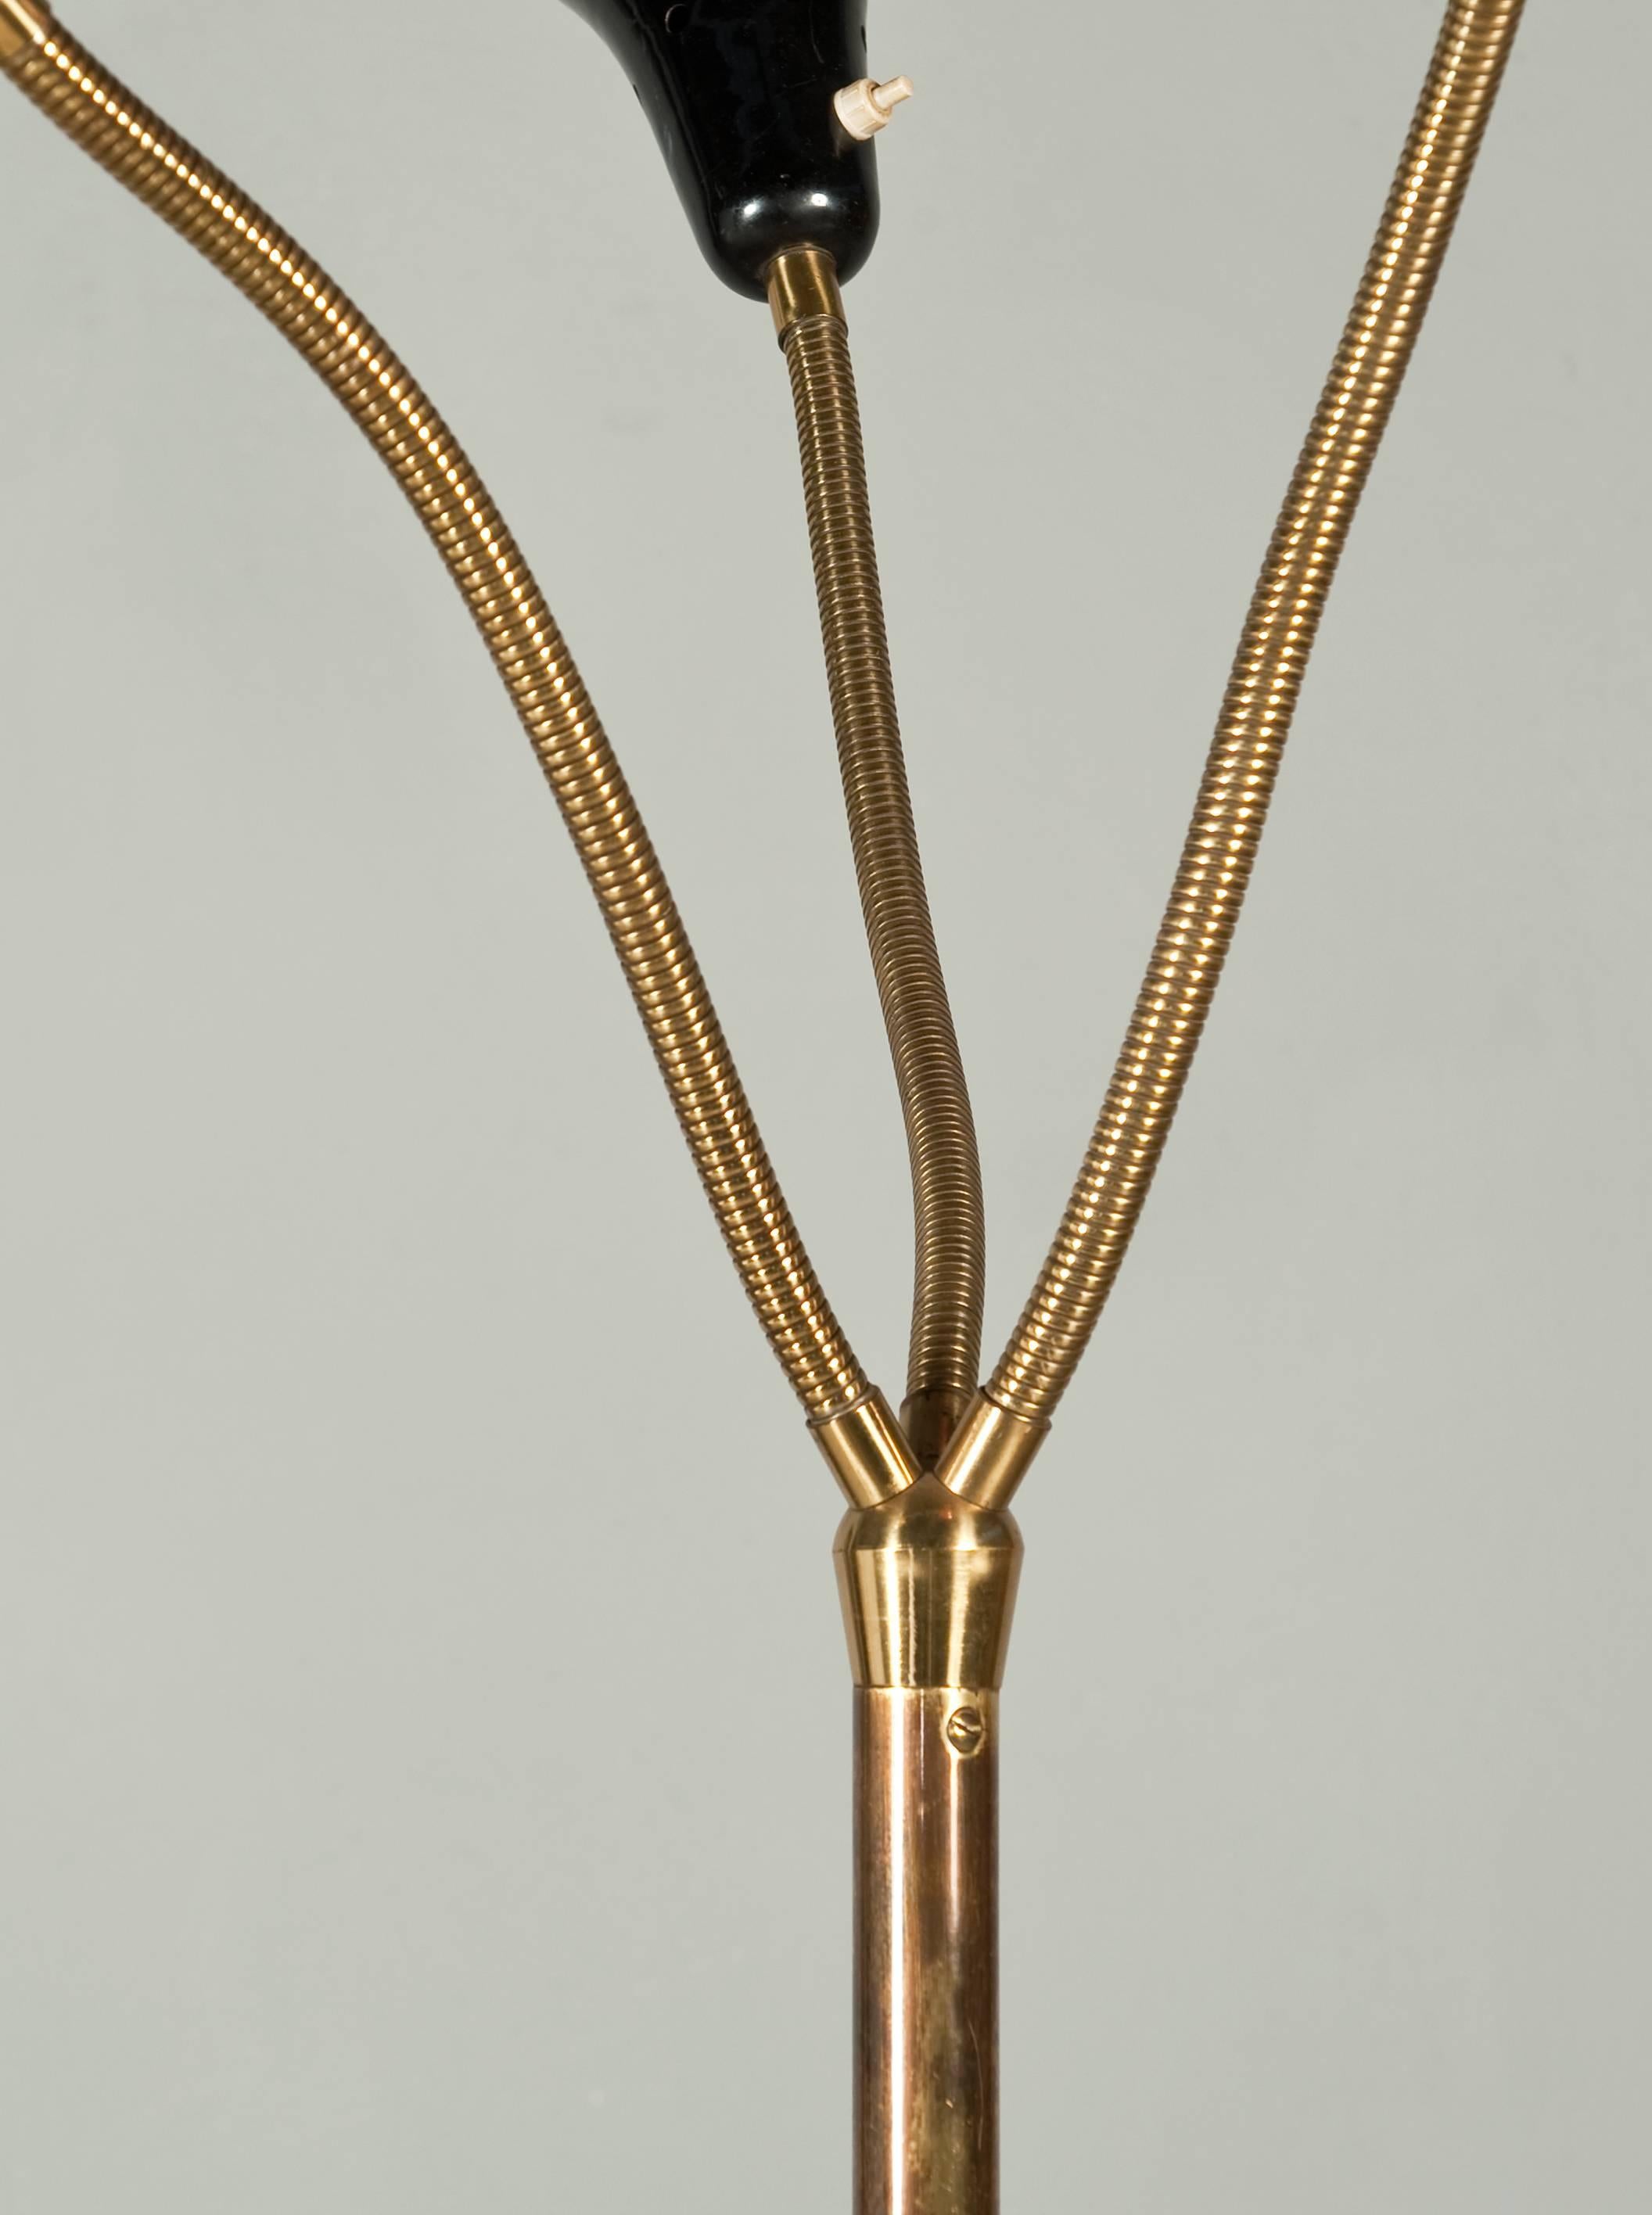 Stunning brass and metal floor lamp, black, white and orange metal lacquered cones.